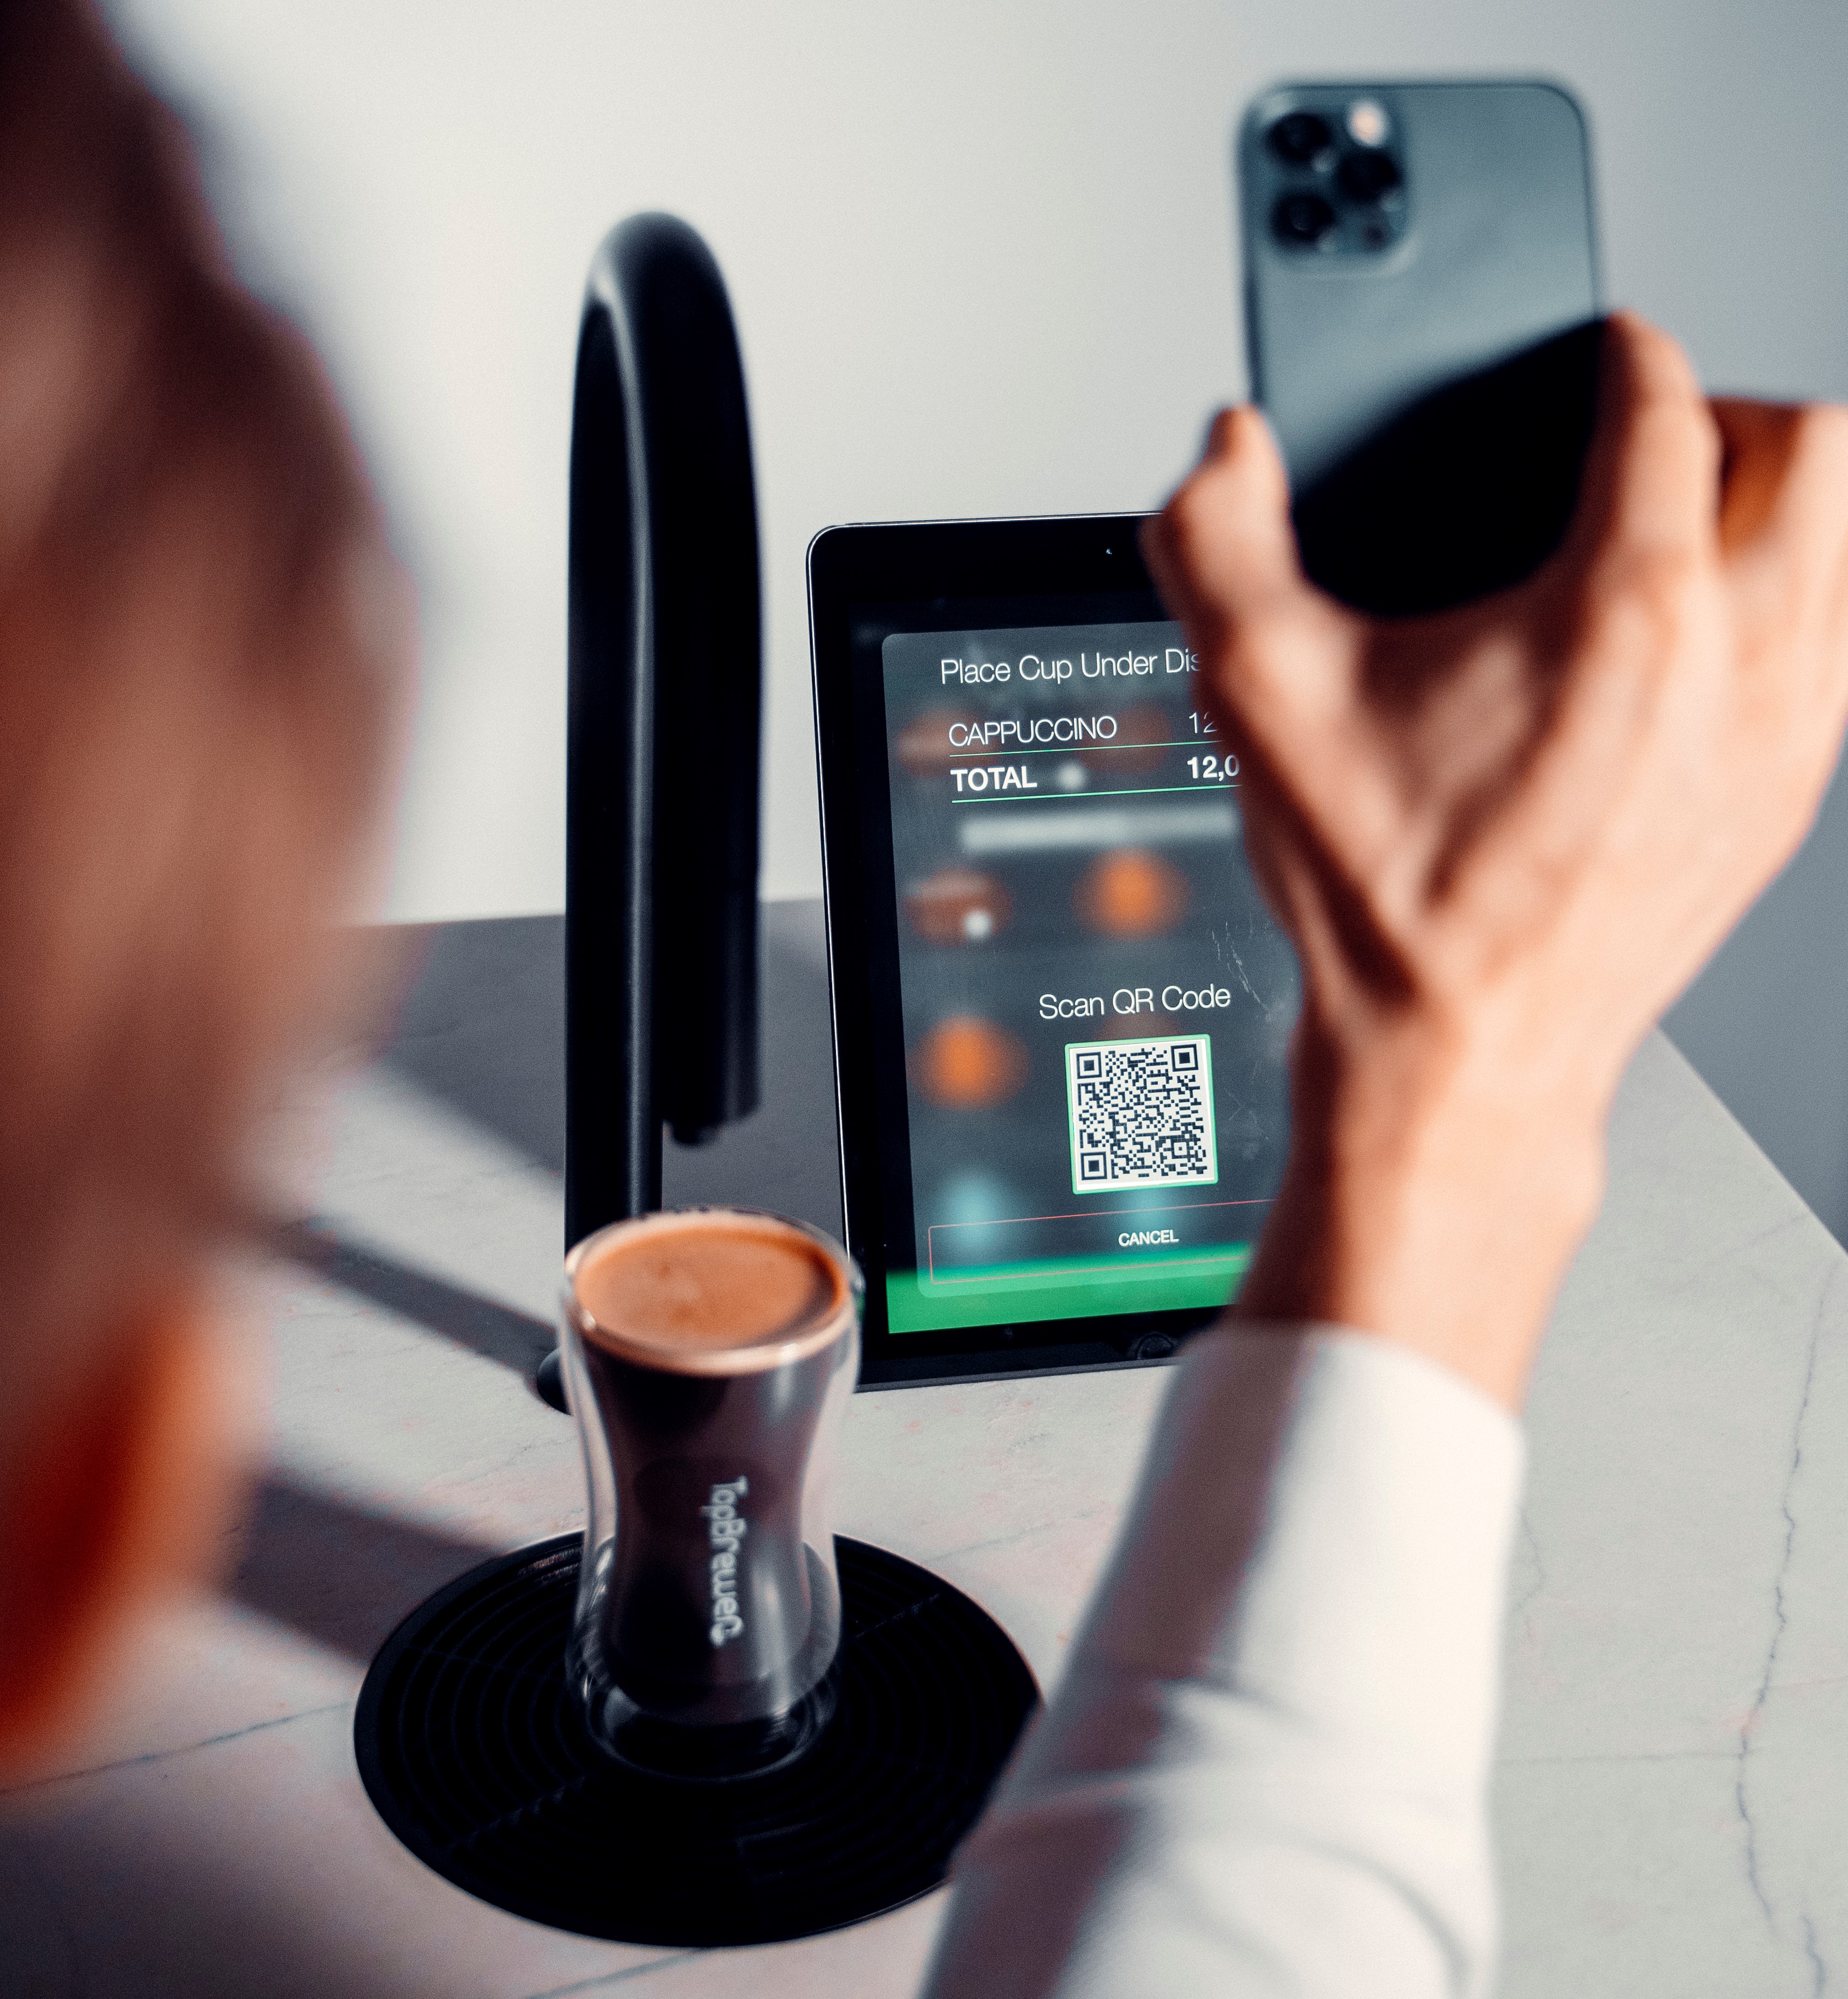 A member making a coffee by scanning QR code